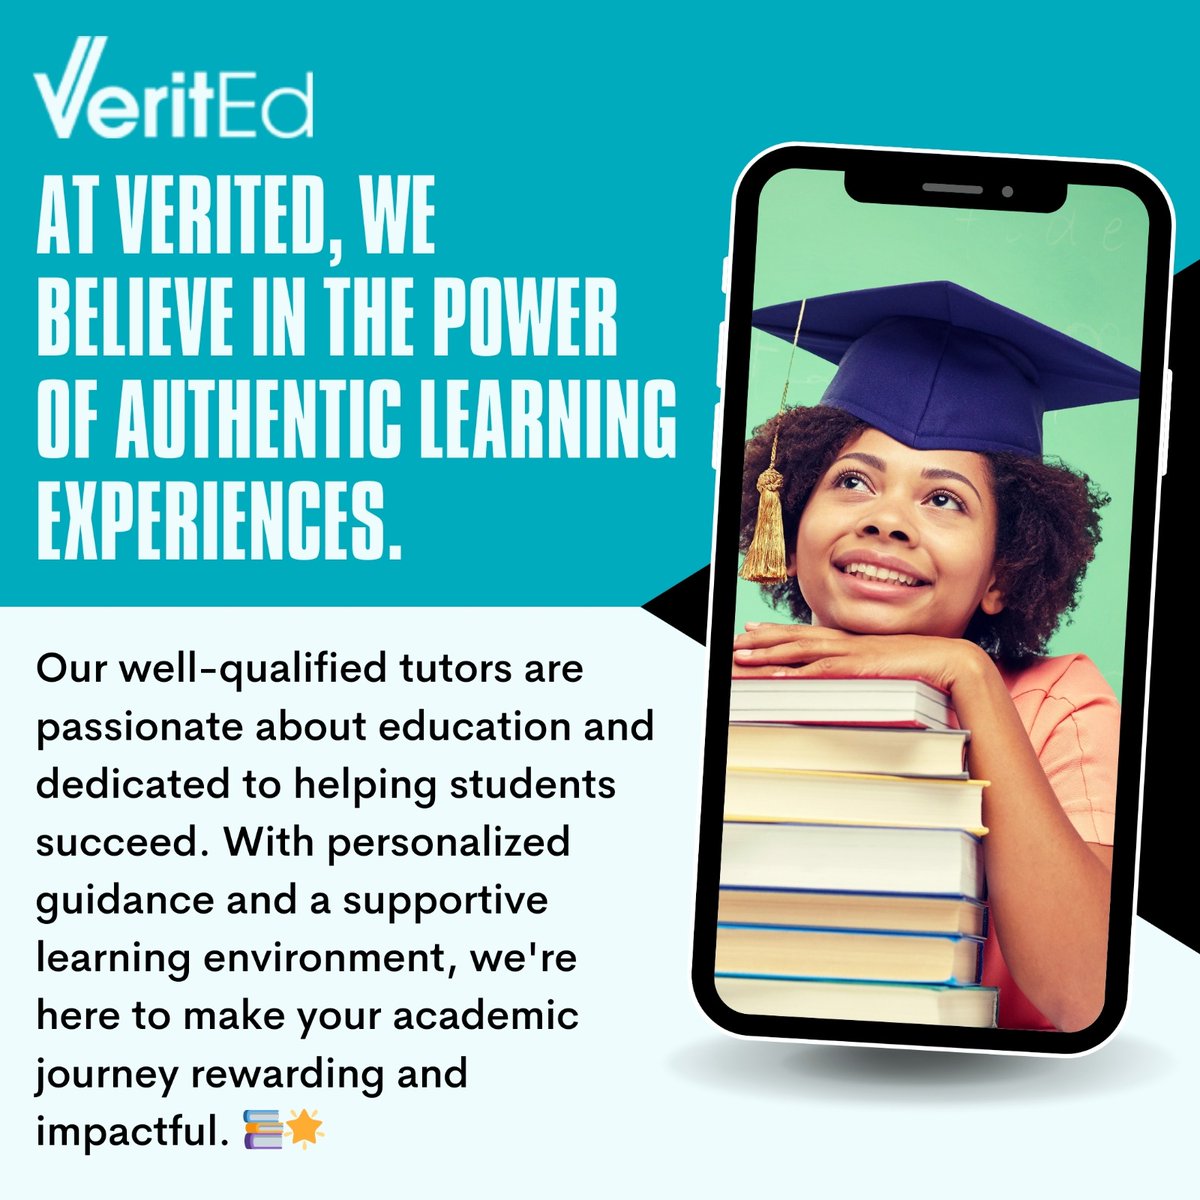 Ready to unlock your full potential and make your academic journey impactful? Join VeritEd today! 🌟📚
.
𝑳𝒆𝒂𝒓𝒏 𝑴𝒐𝒓𝒆 👉🏻 Follow us or feel free to DM.
.
.
#VeritEd #ElevateEducation #PersonalizedTutoring #Mentorship #HighAchievers #QualityEducation #AffordableTutoring